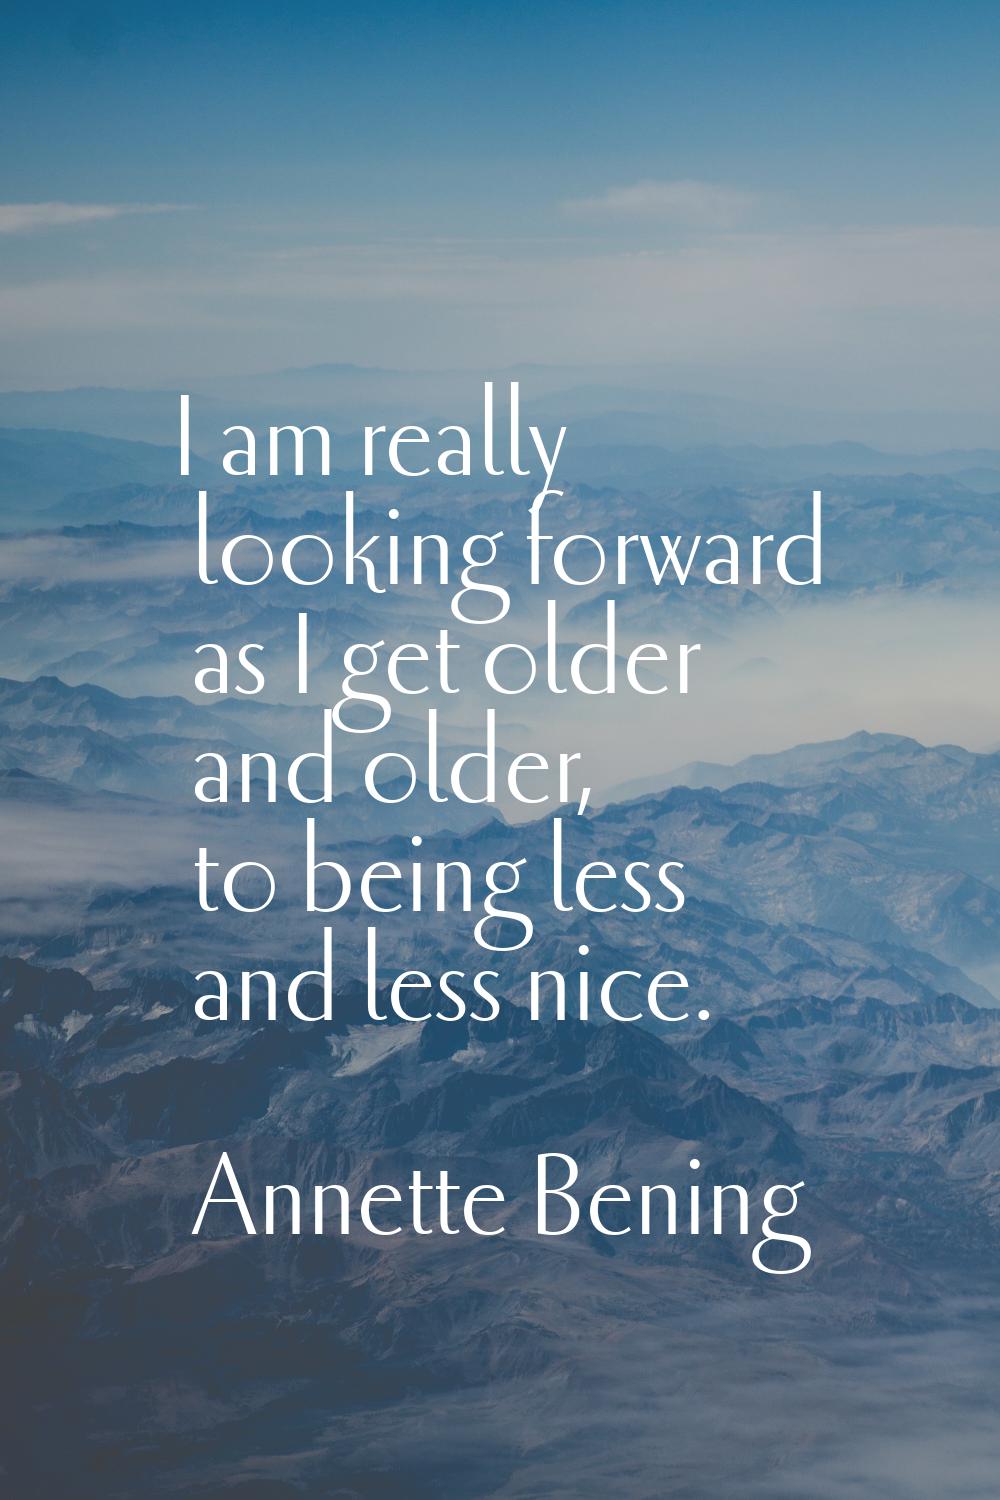 I am really looking forward as I get older and older, to being less and less nice.